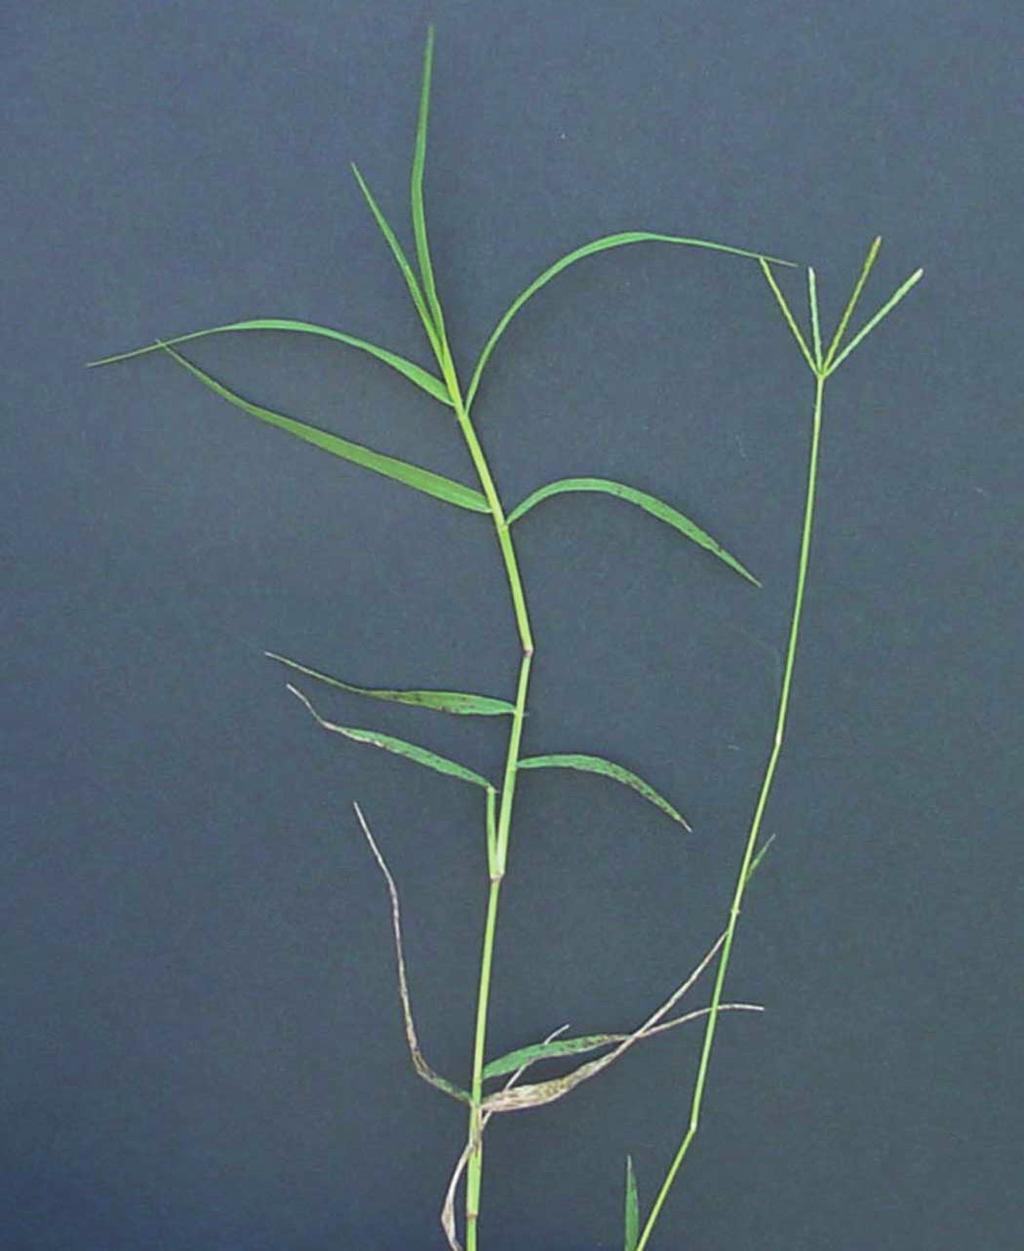 Bermudagrass Cynodon dactylon with thick rhizomes Sheath: with a few hairs Ligule: prominent membranous ligule Blade: with prominent white midvein, hairs at the base of leaf blade, to 20 inches long